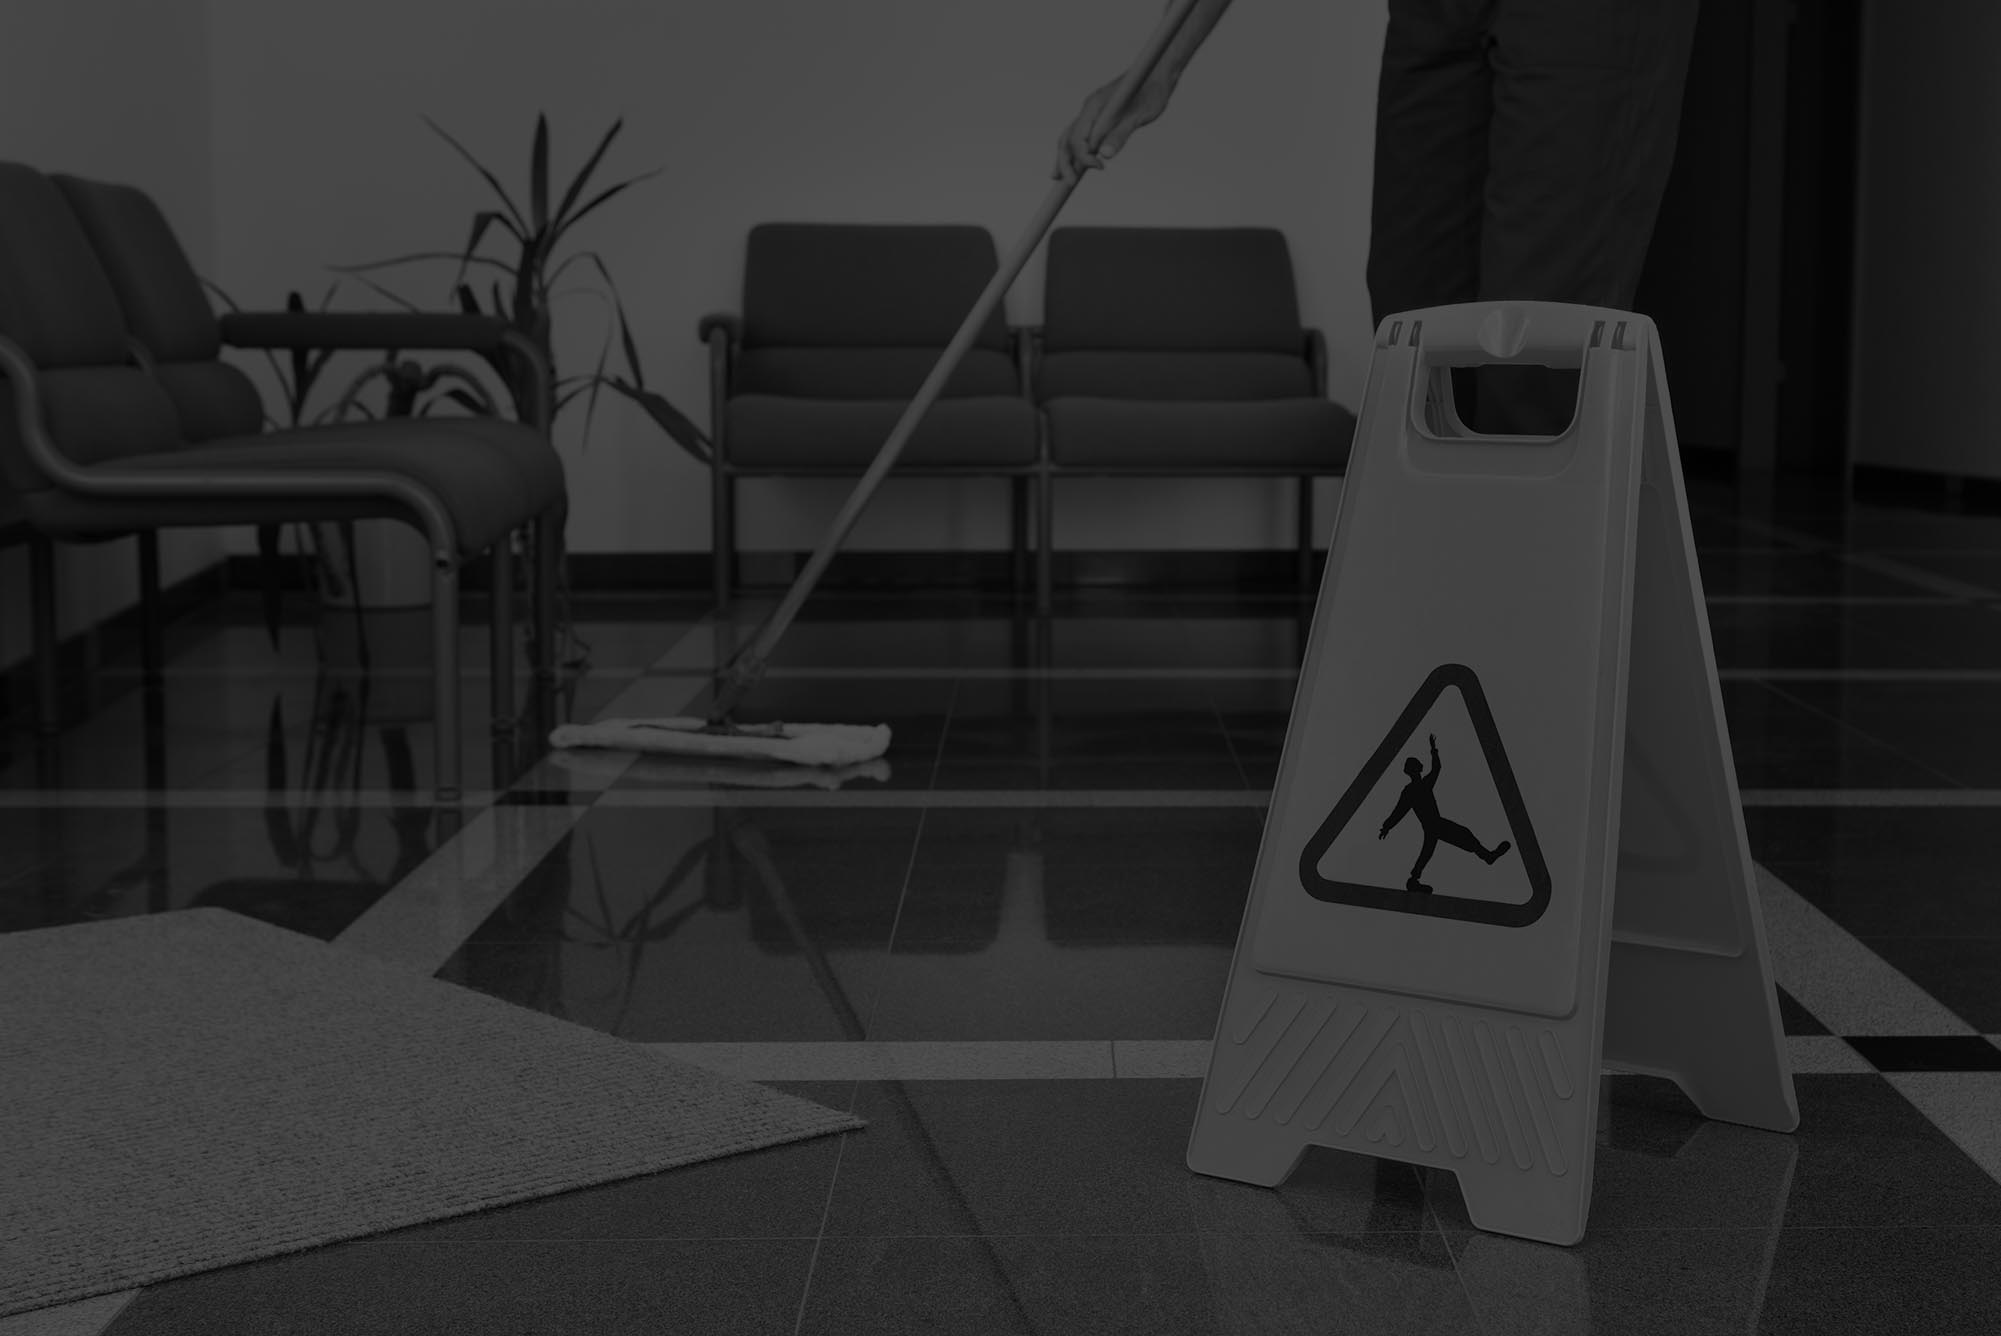 A cleaning company provides advice in respect of the most appropriate cleaning agent to be used for commercial floor cleaning. A customer follows the advice, though the agent creates a slippery surface leading to injury.